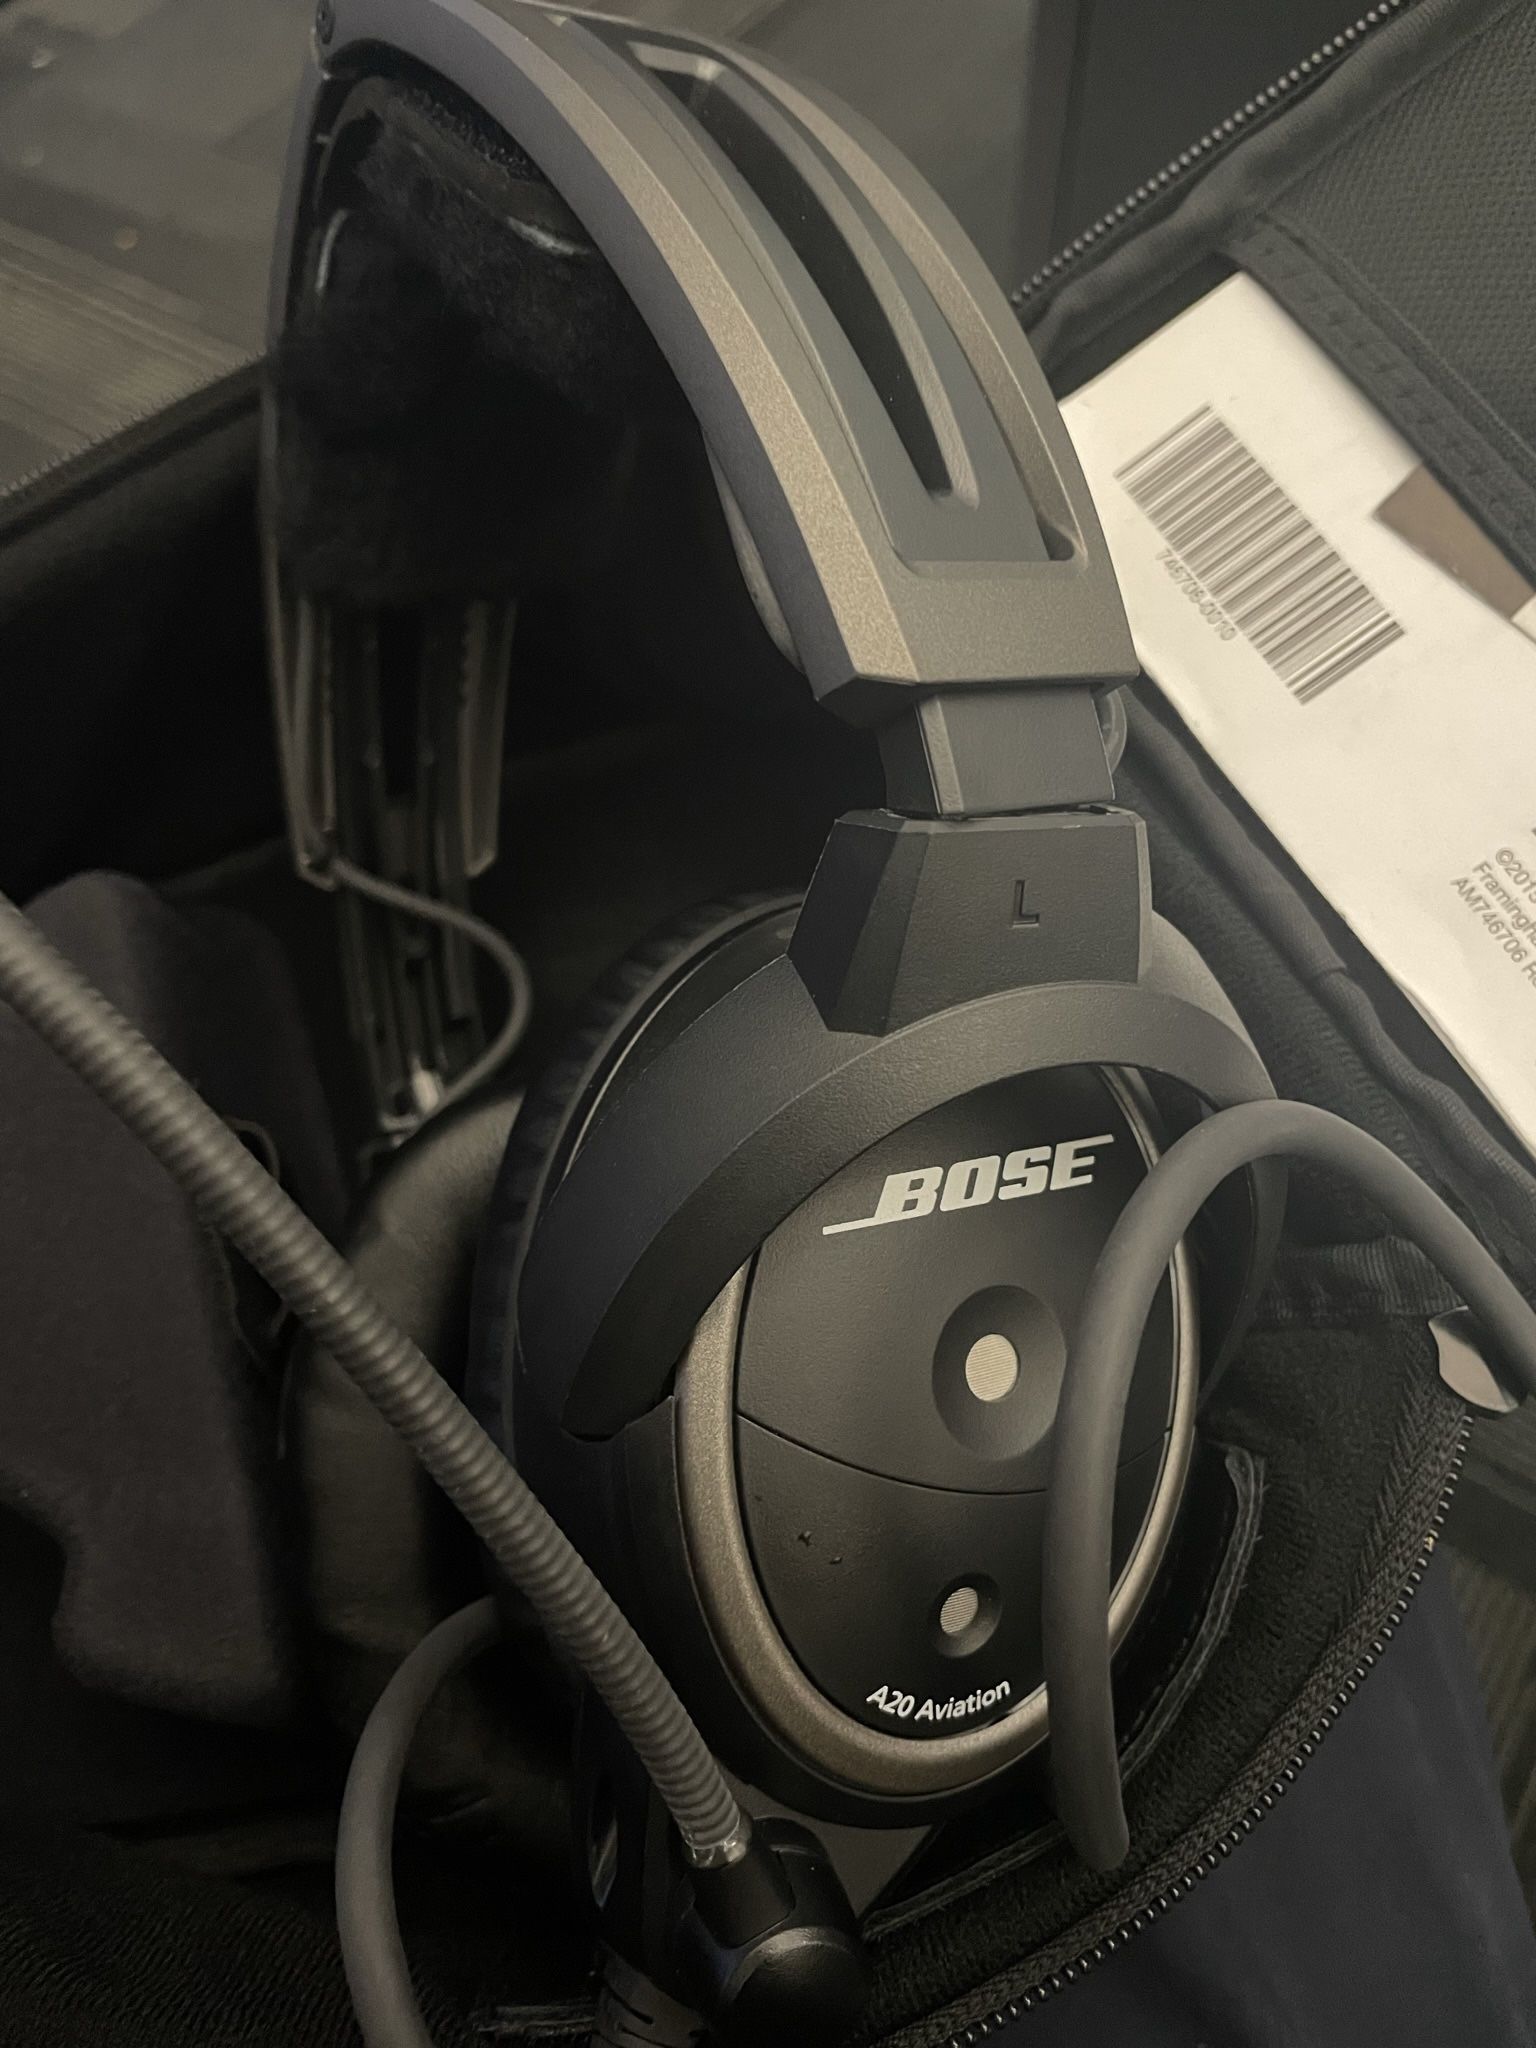 Bose A20 Aviation Headset With Bluetooth 